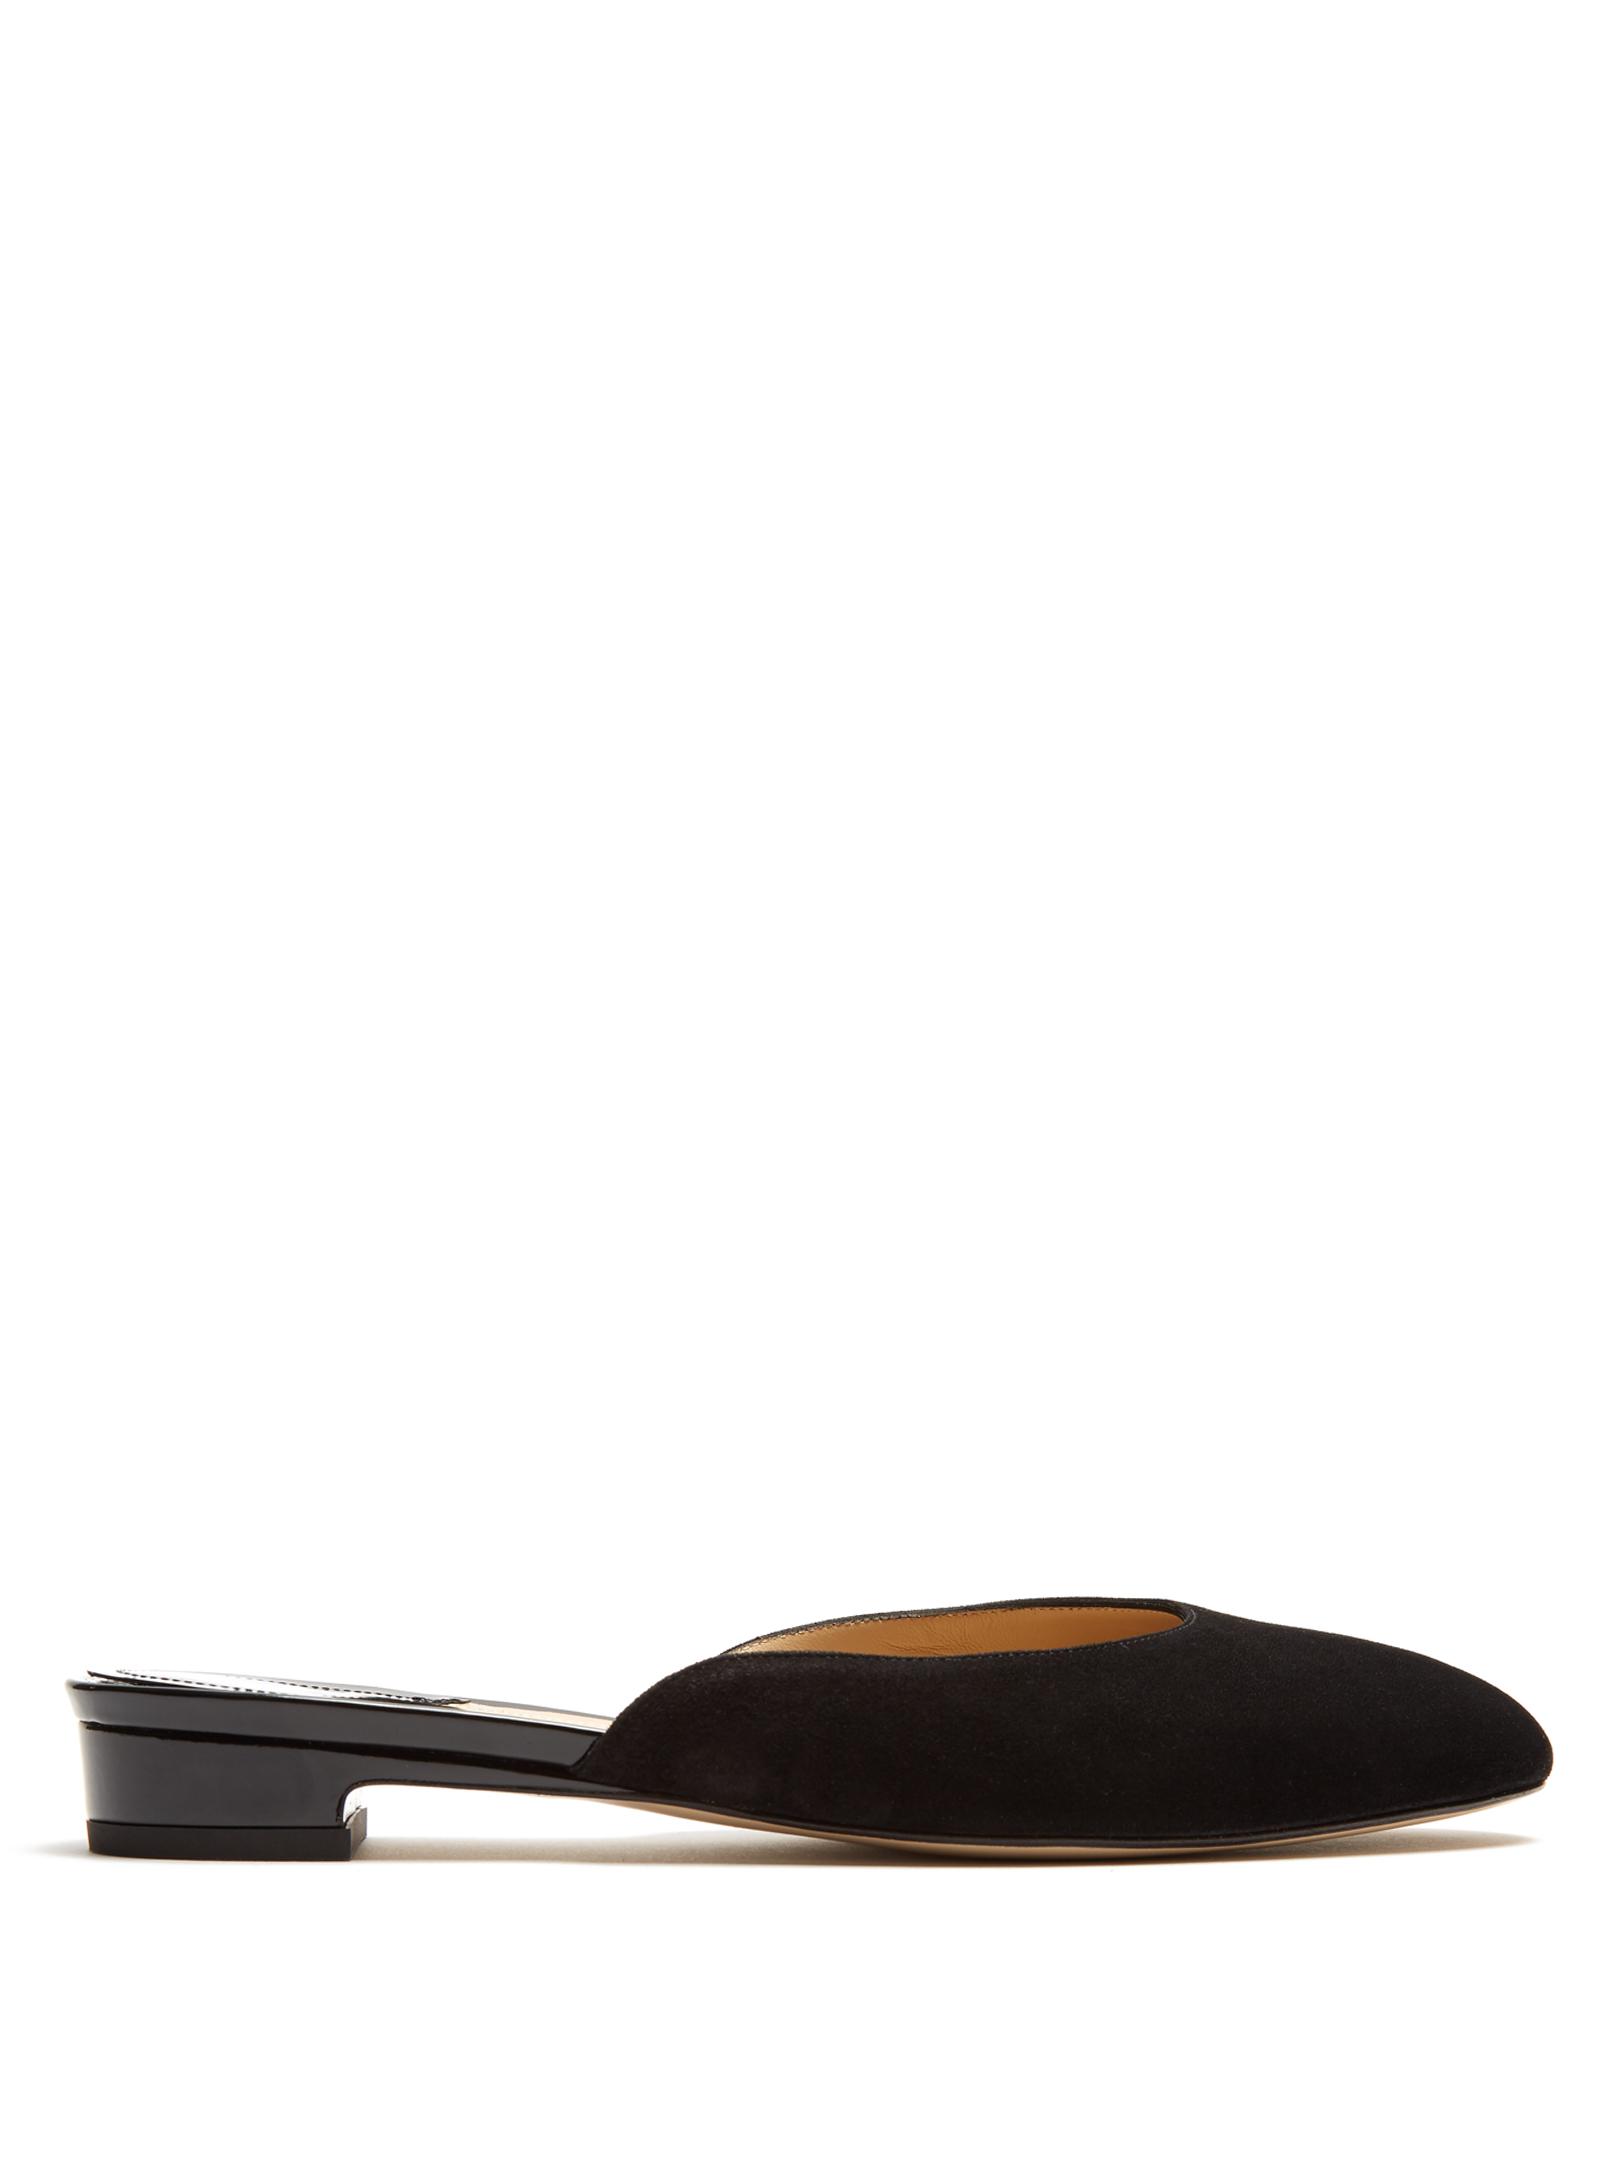 Lyst - Paul Andrew Alba Suede Backless Loafer in Black